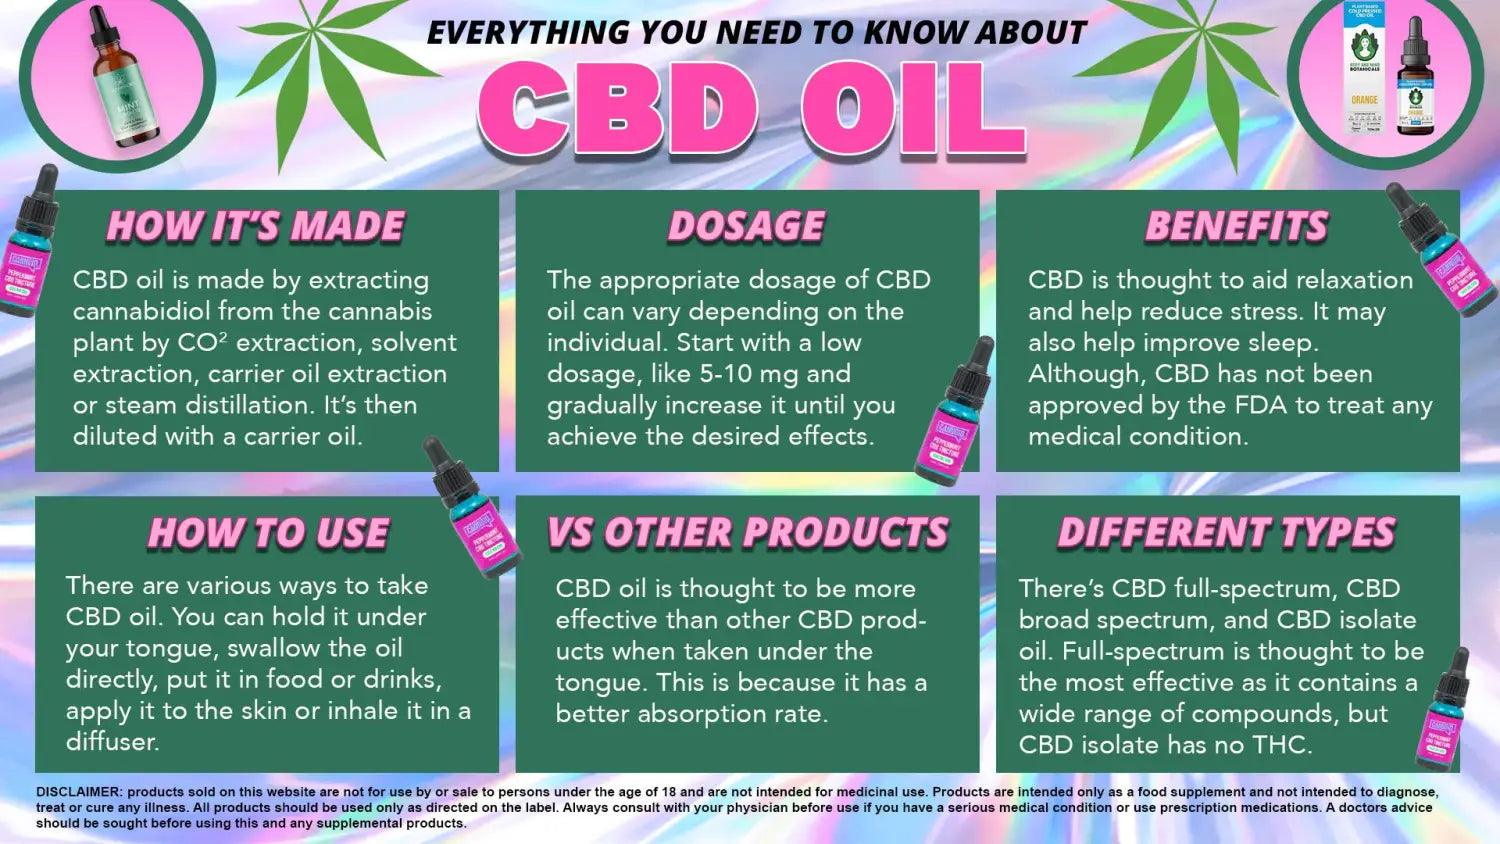 BEVERAGES YOU CAN ADD CBD OIL